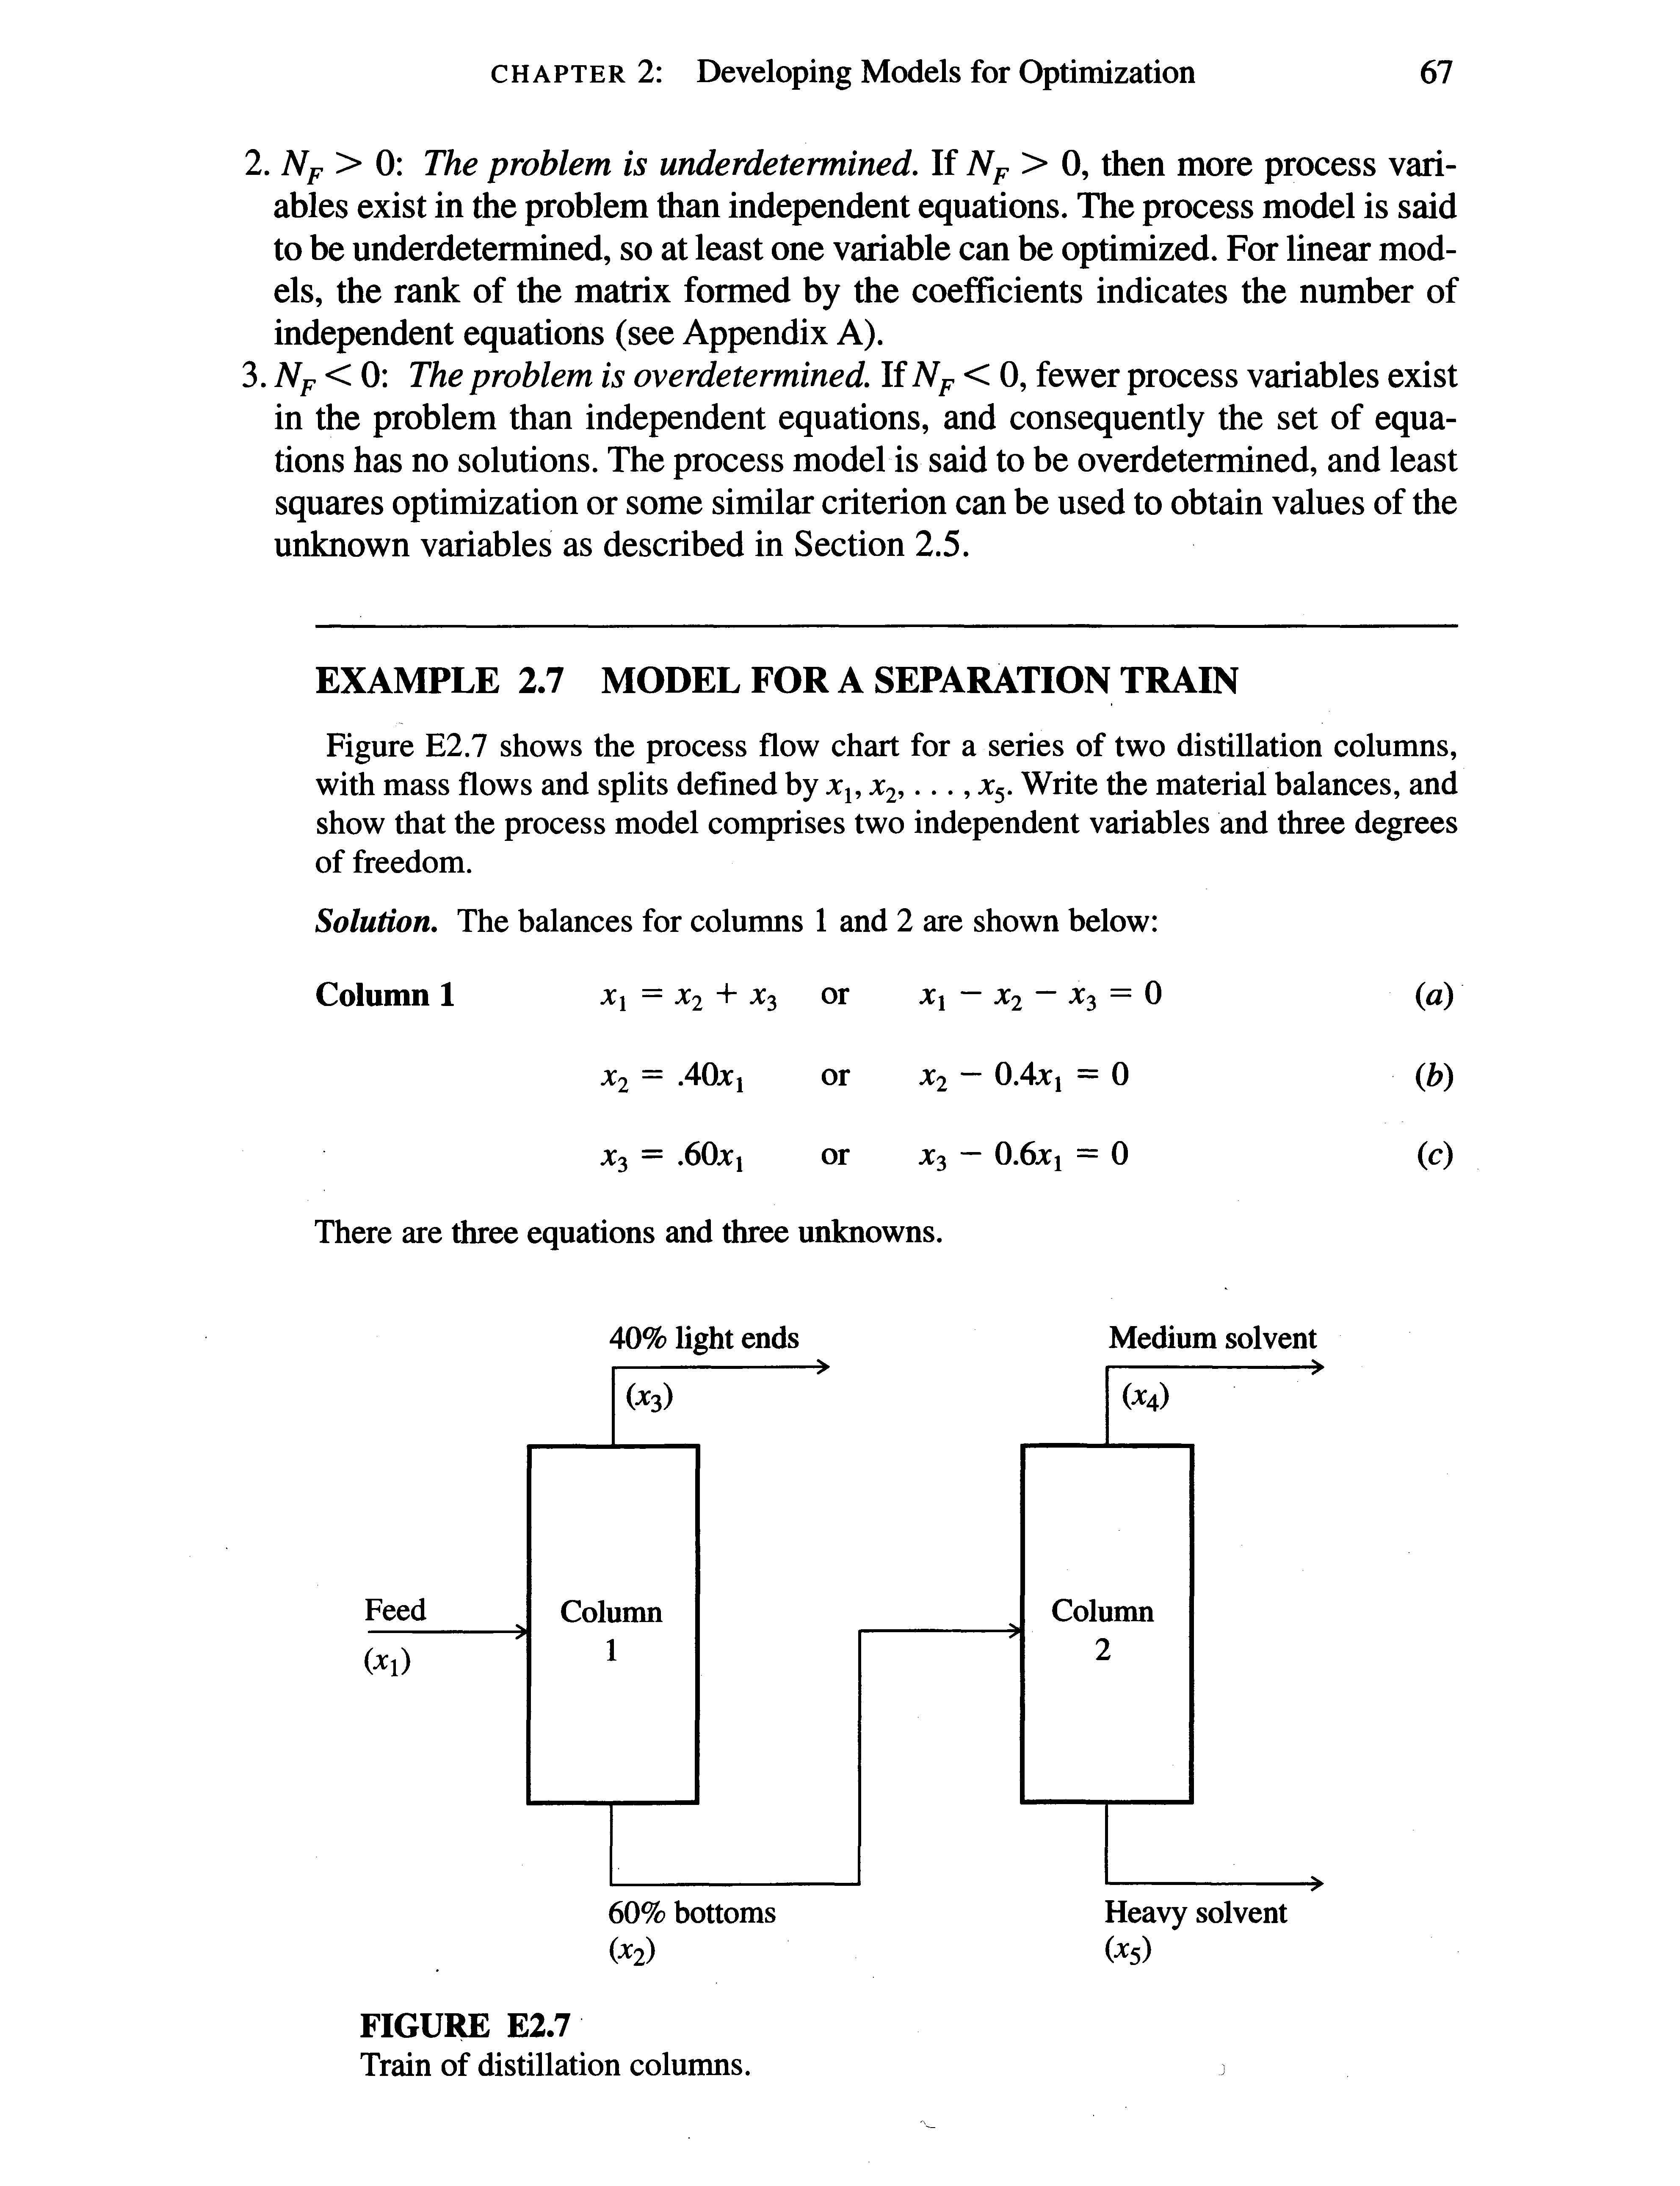 Figure E2.7 shows the process flow chart for a series of two distillation columns, with mass flows and splits defined by j, x2,..., 5. Write the material balances, and show that the process model comprises two independent variables and three degrees of freedom.